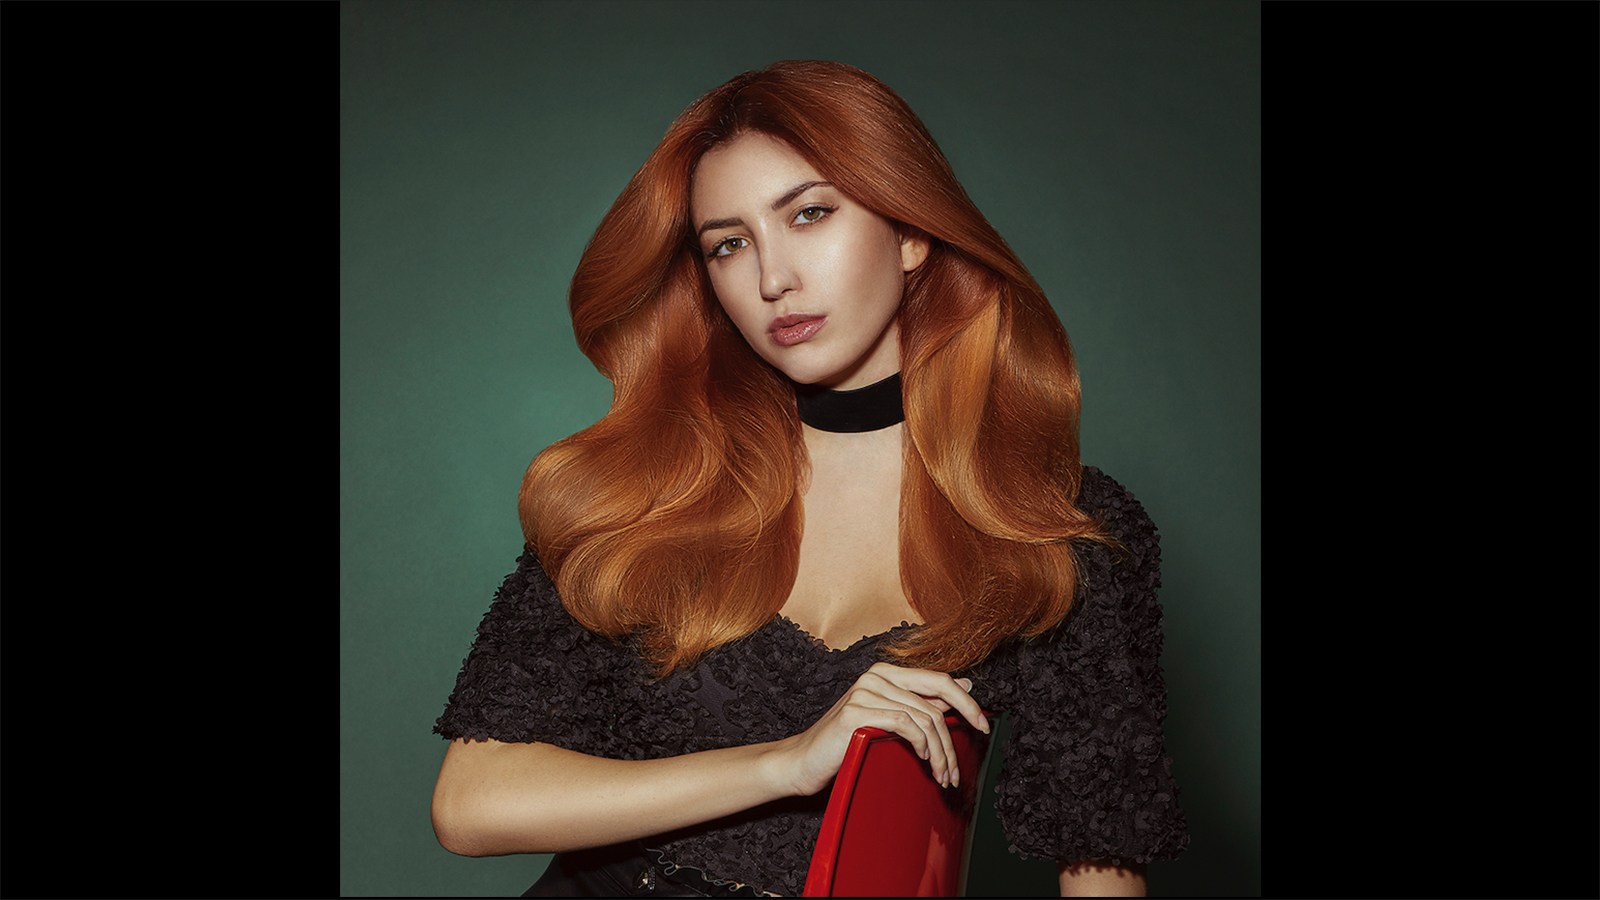 ColorDesign Hair Color Launches Aperol-Inspired Box
Collection